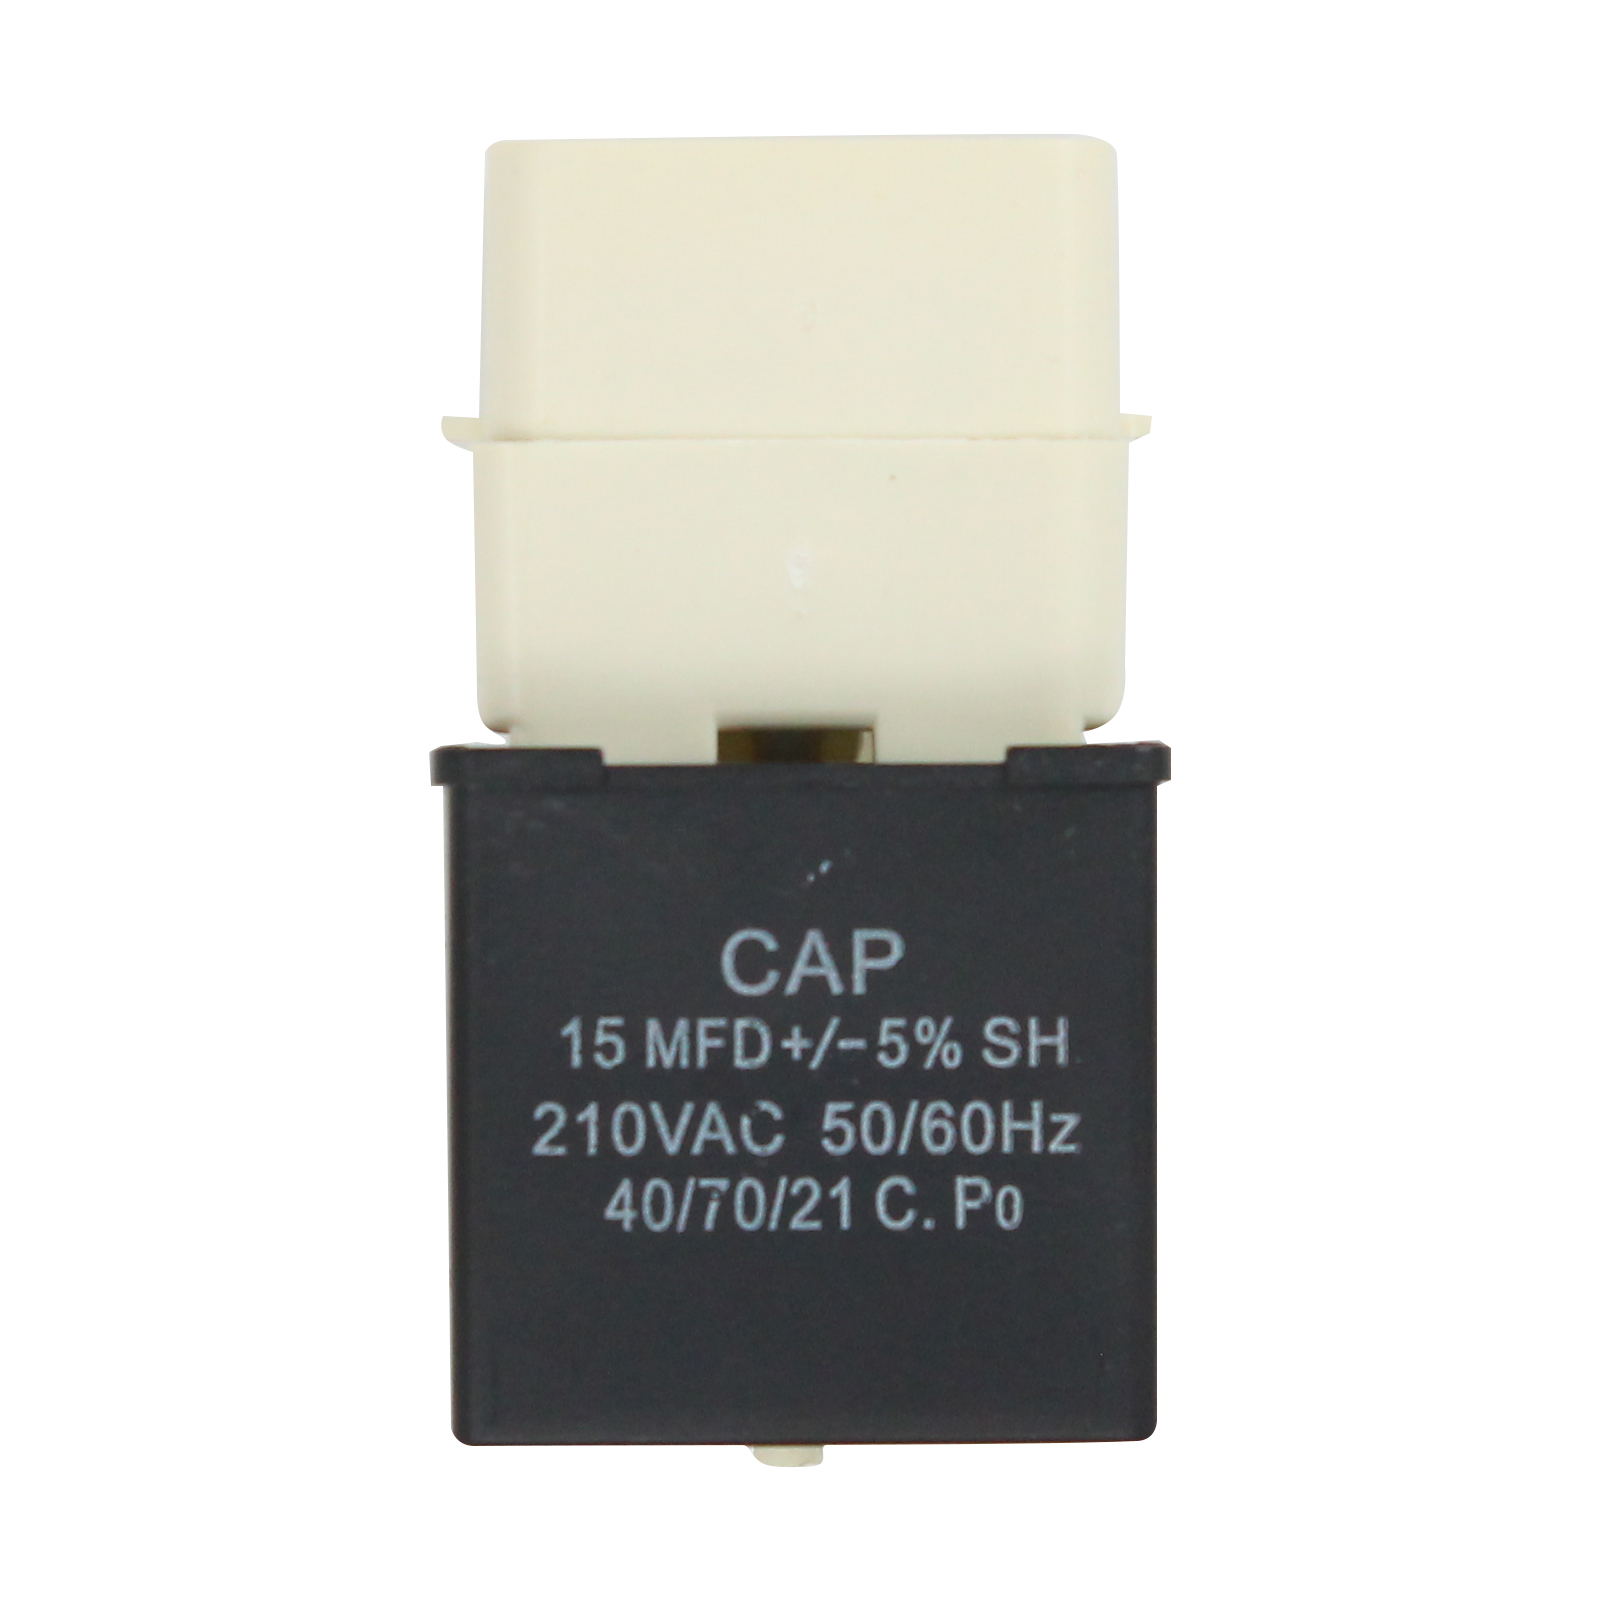 W10613606 Refrigerator Compressor Start Relay & Capacitor Replacement for Amana ABB2227DEW Refrigerator - Compatible with W10613606 Start Device Relay Overload With Capacitor - image 2 of 4